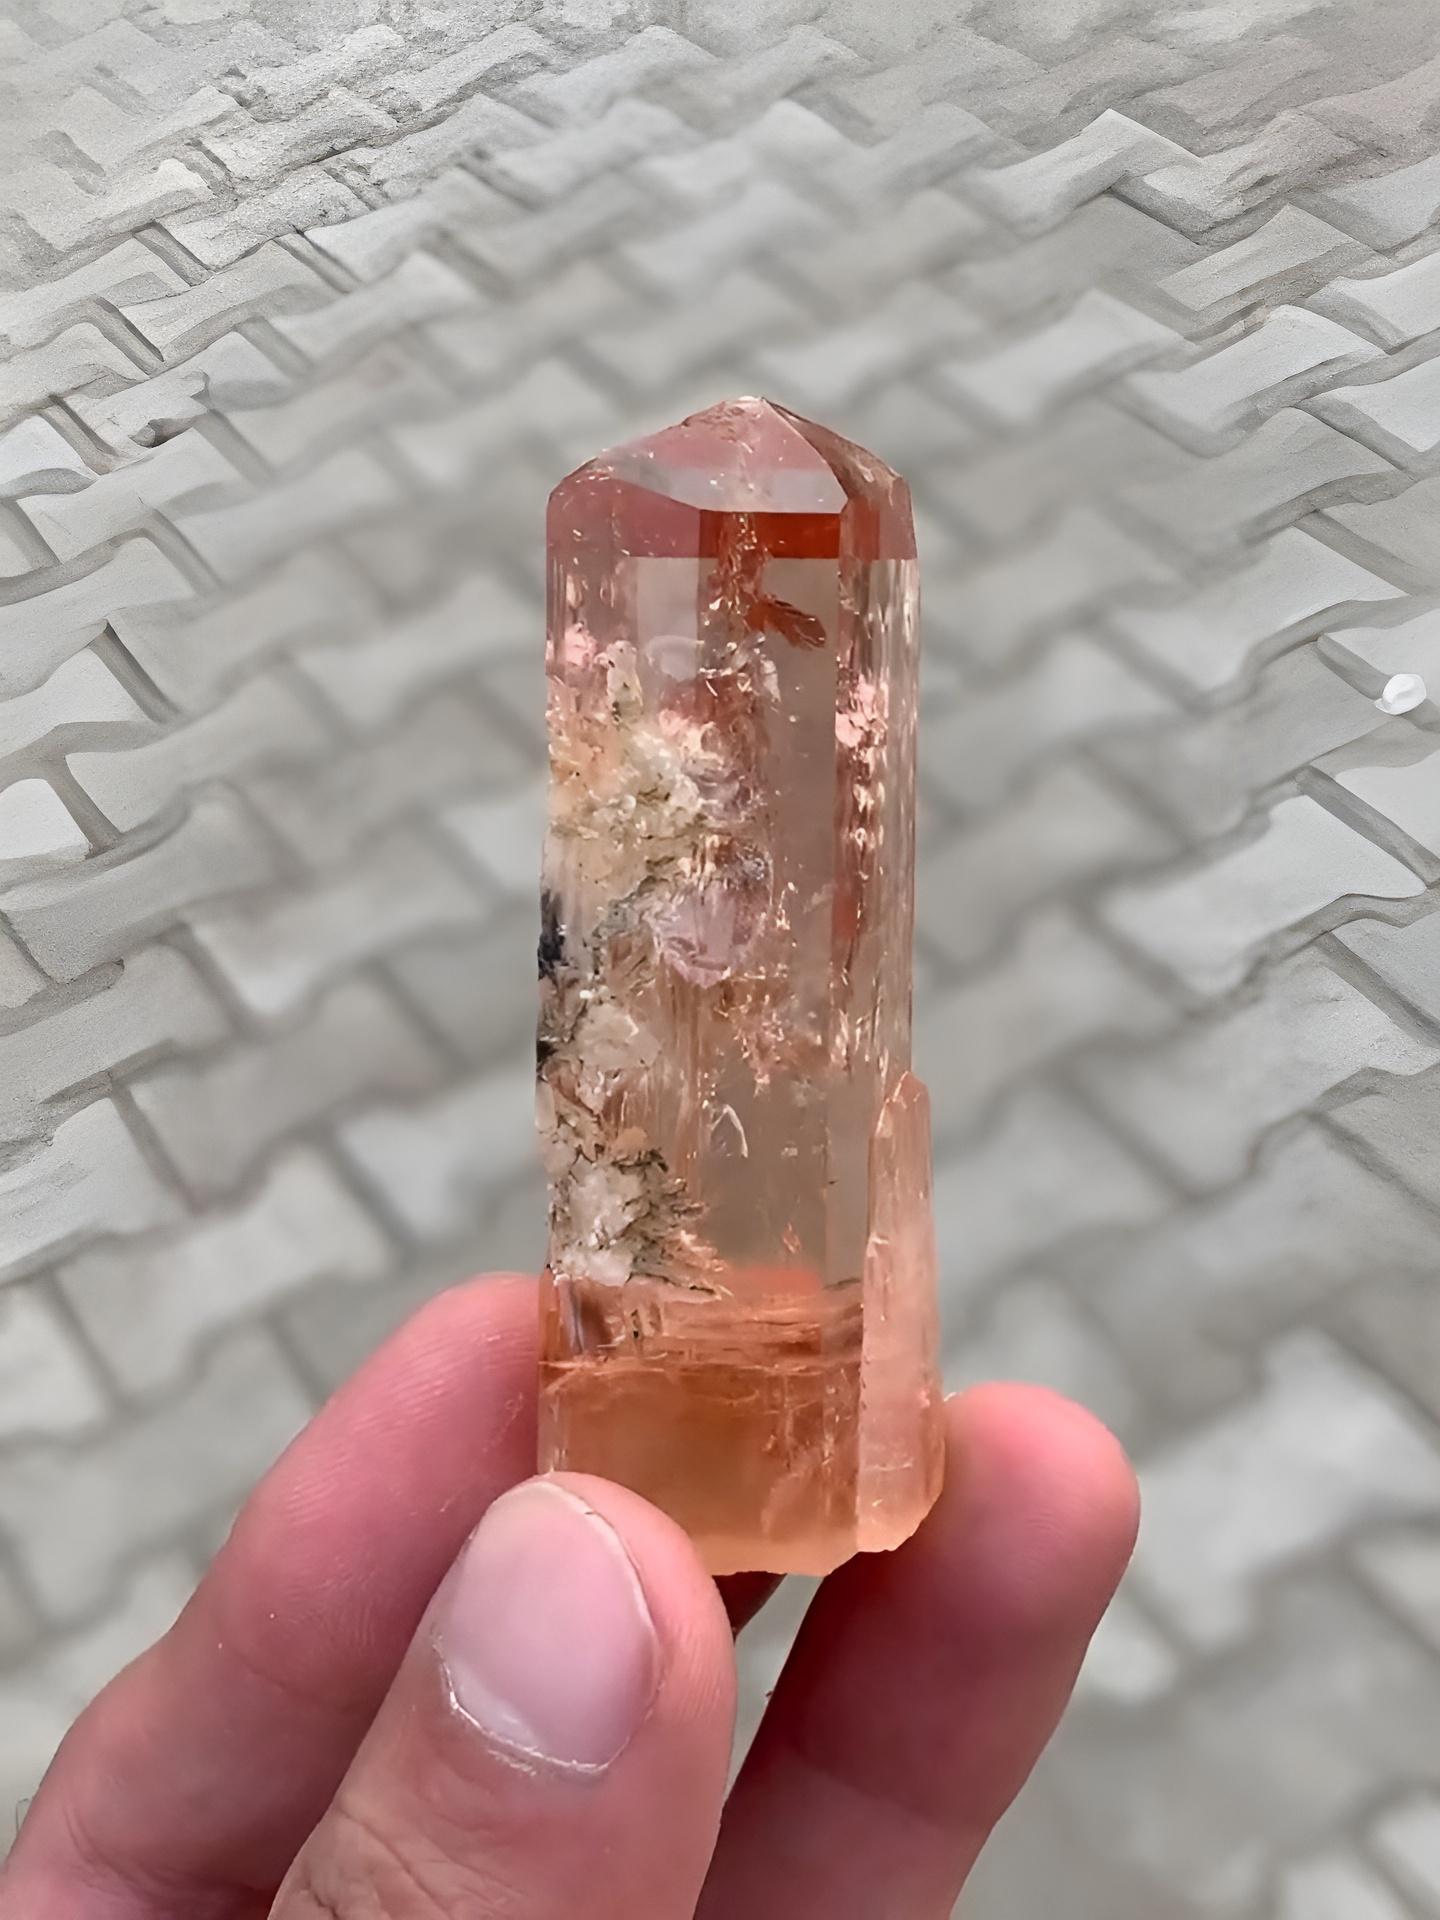 Uncut Impressive Double Terminated Lustrous Imperial Topaz Crystal From Pakistan